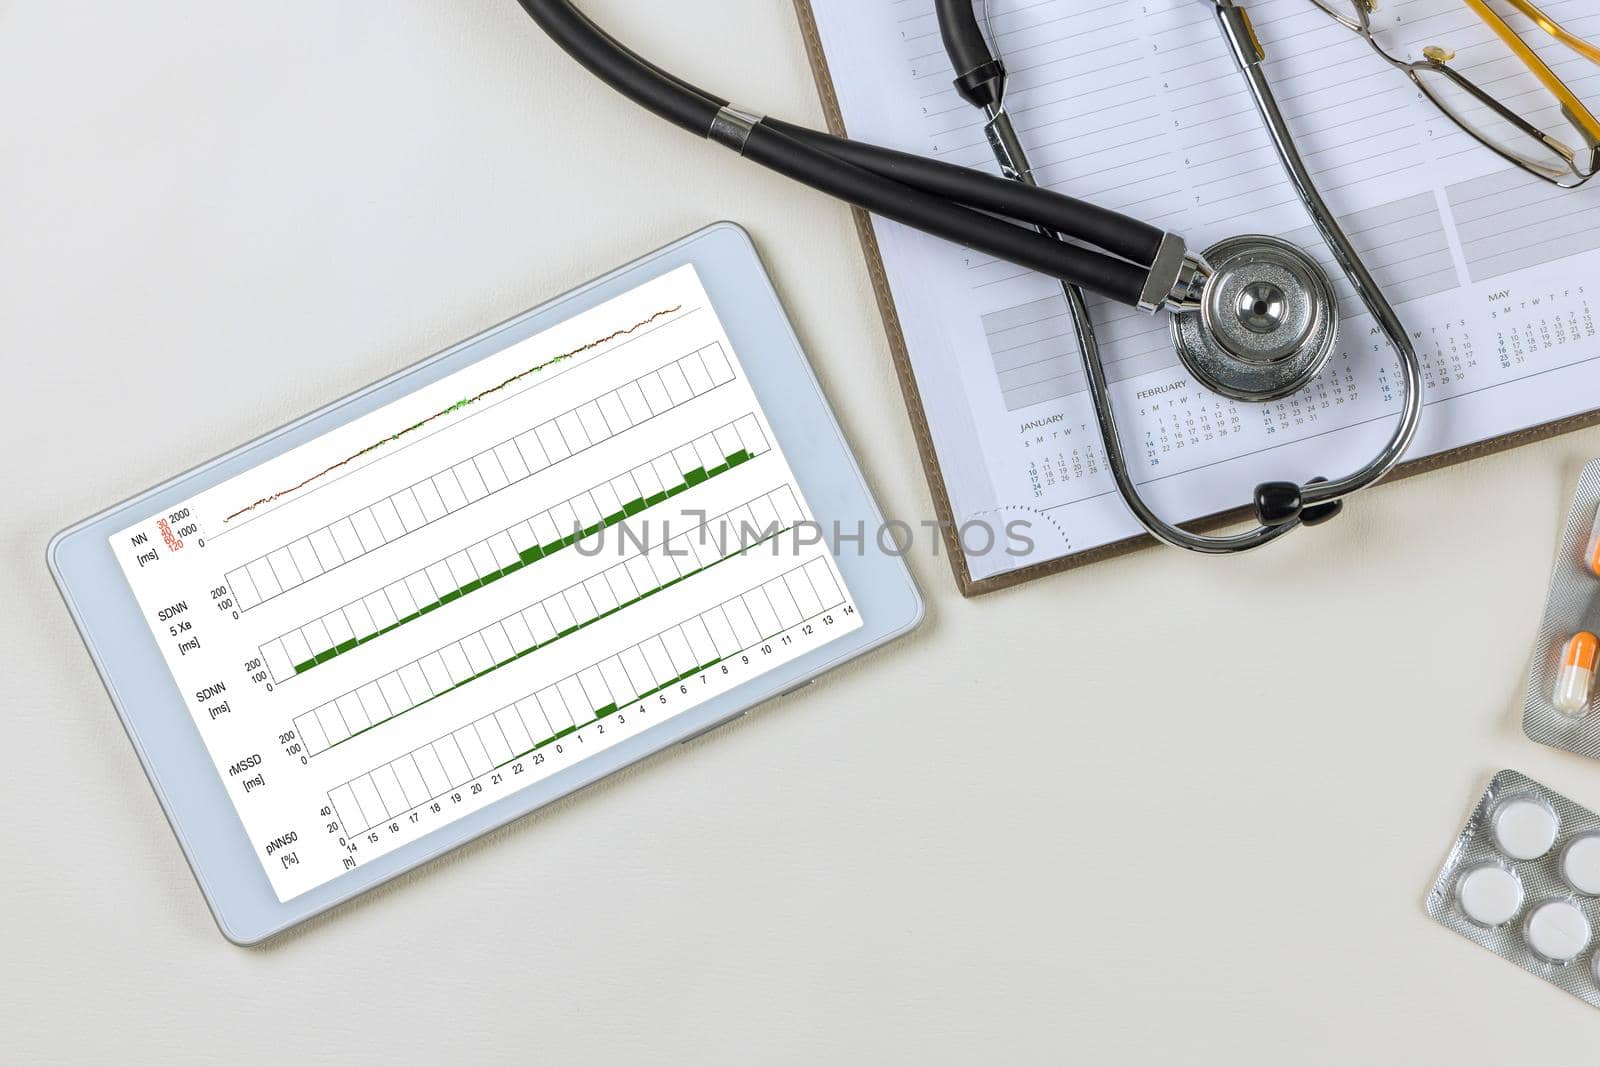 Cardiograph ekg electrocardiogram heart showing in tablet with medical documents on desk of doctor workplace